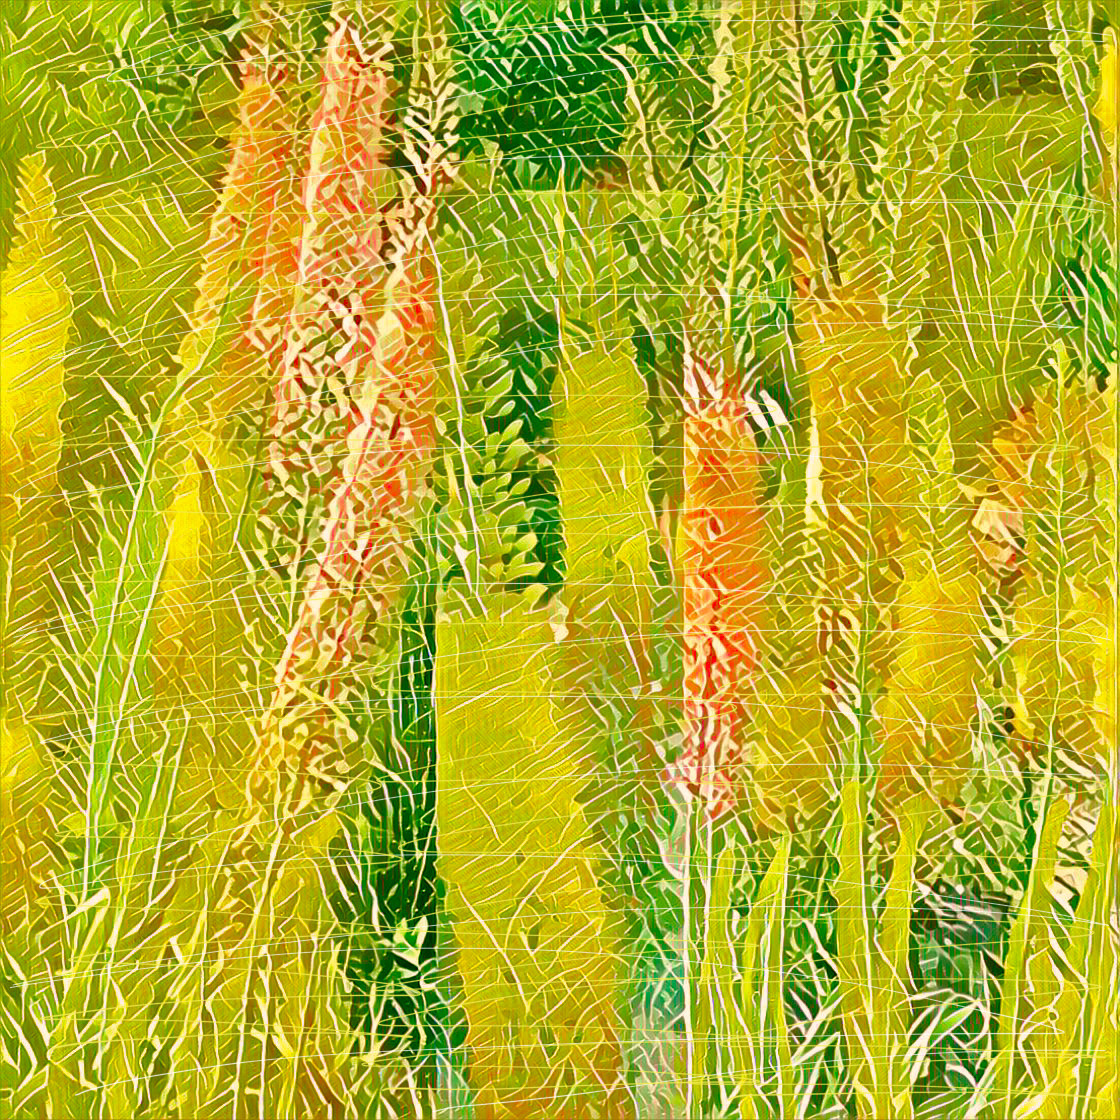 Digital art of long foliage fronds in green, yellow and pinks.